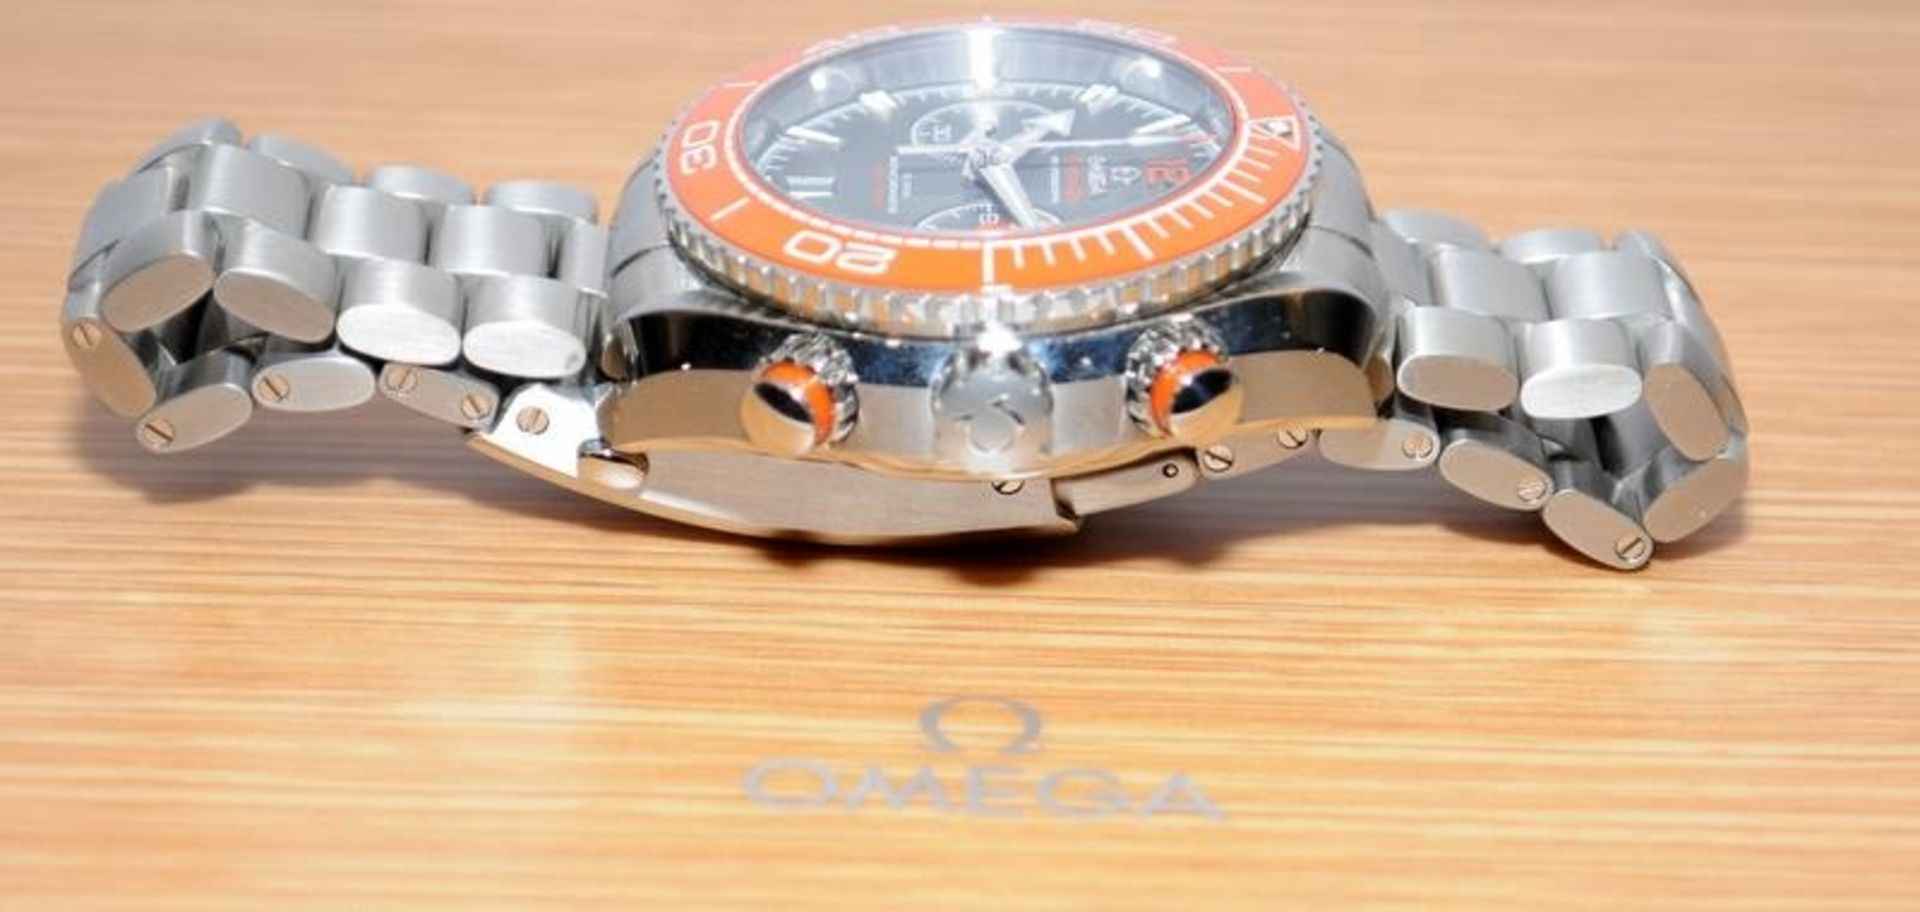 Omega Seamaster Planet Ocean, grey dial/orange bezel variant. Comes complete with papers, inner - Image 7 of 10